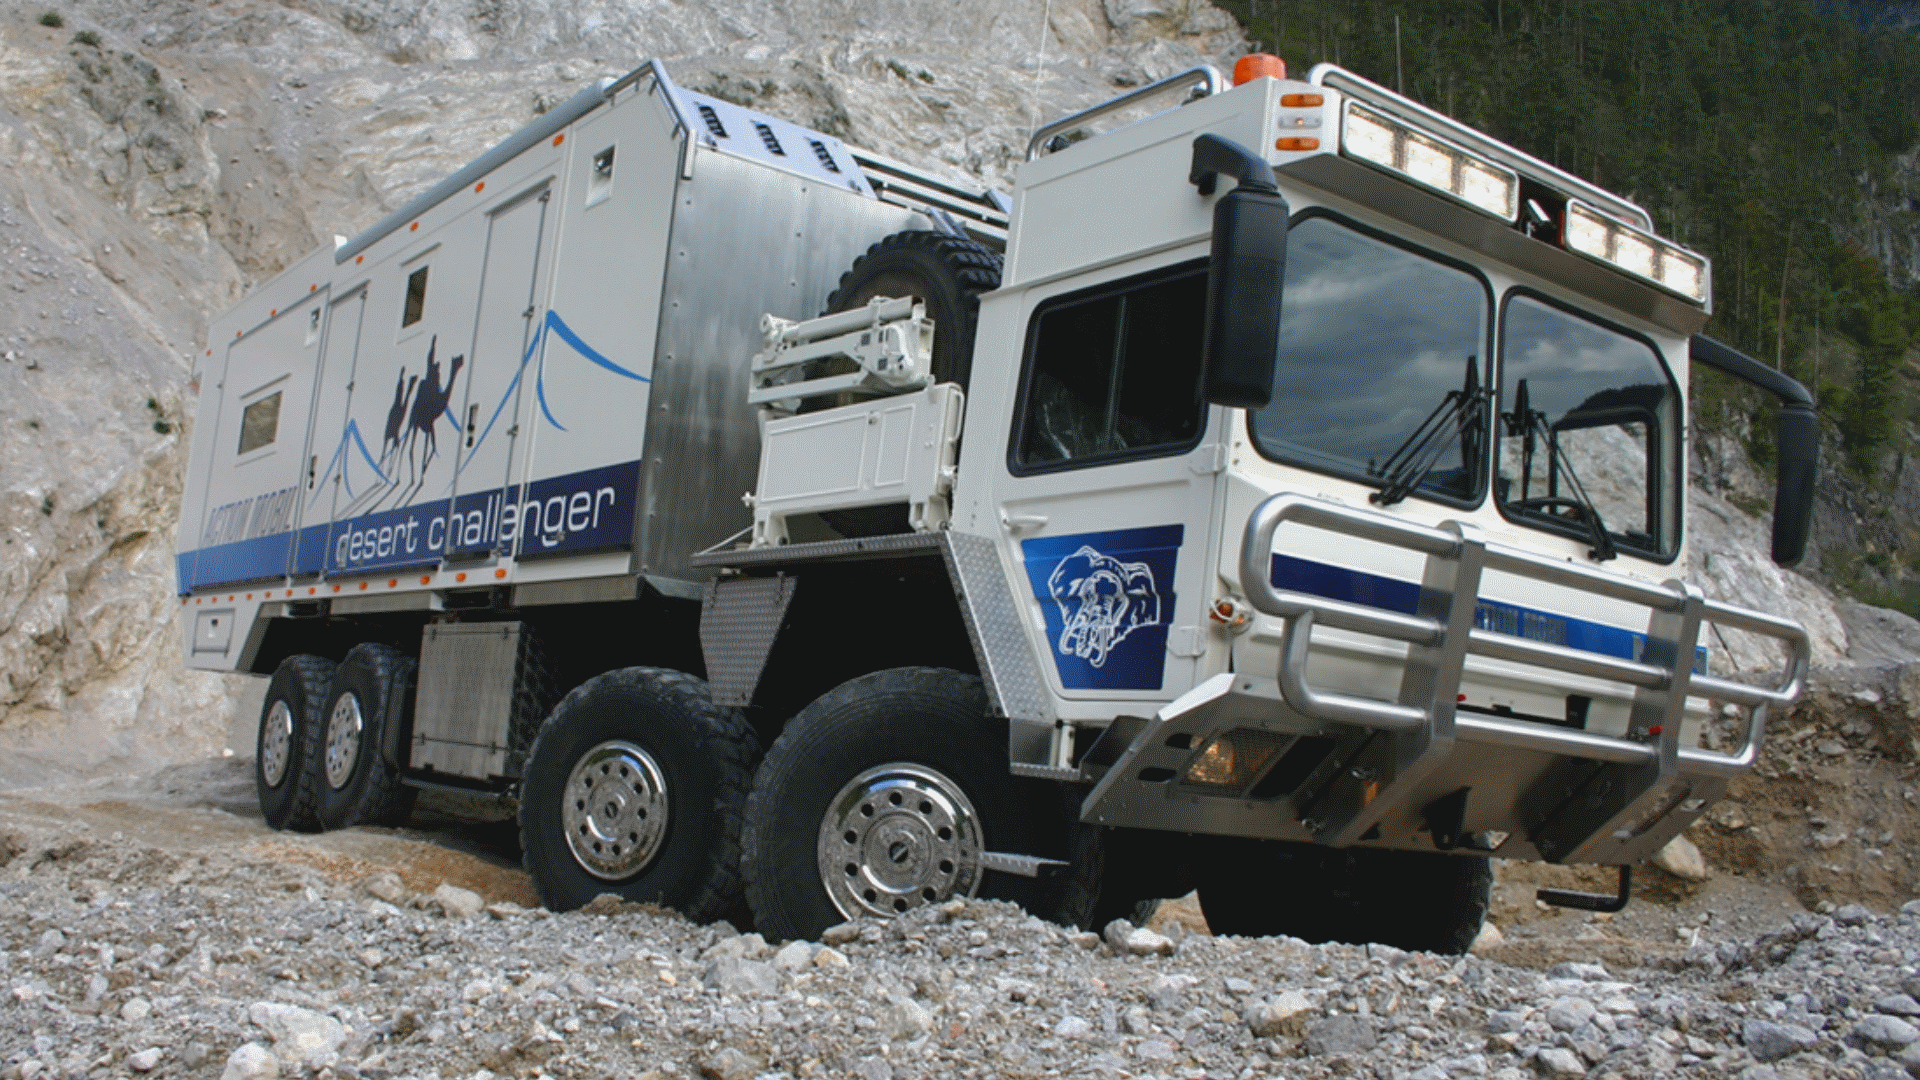 The Action Mobil Desert Challenger Is an Eight-Wheeled RV Based On a Missile Launcher